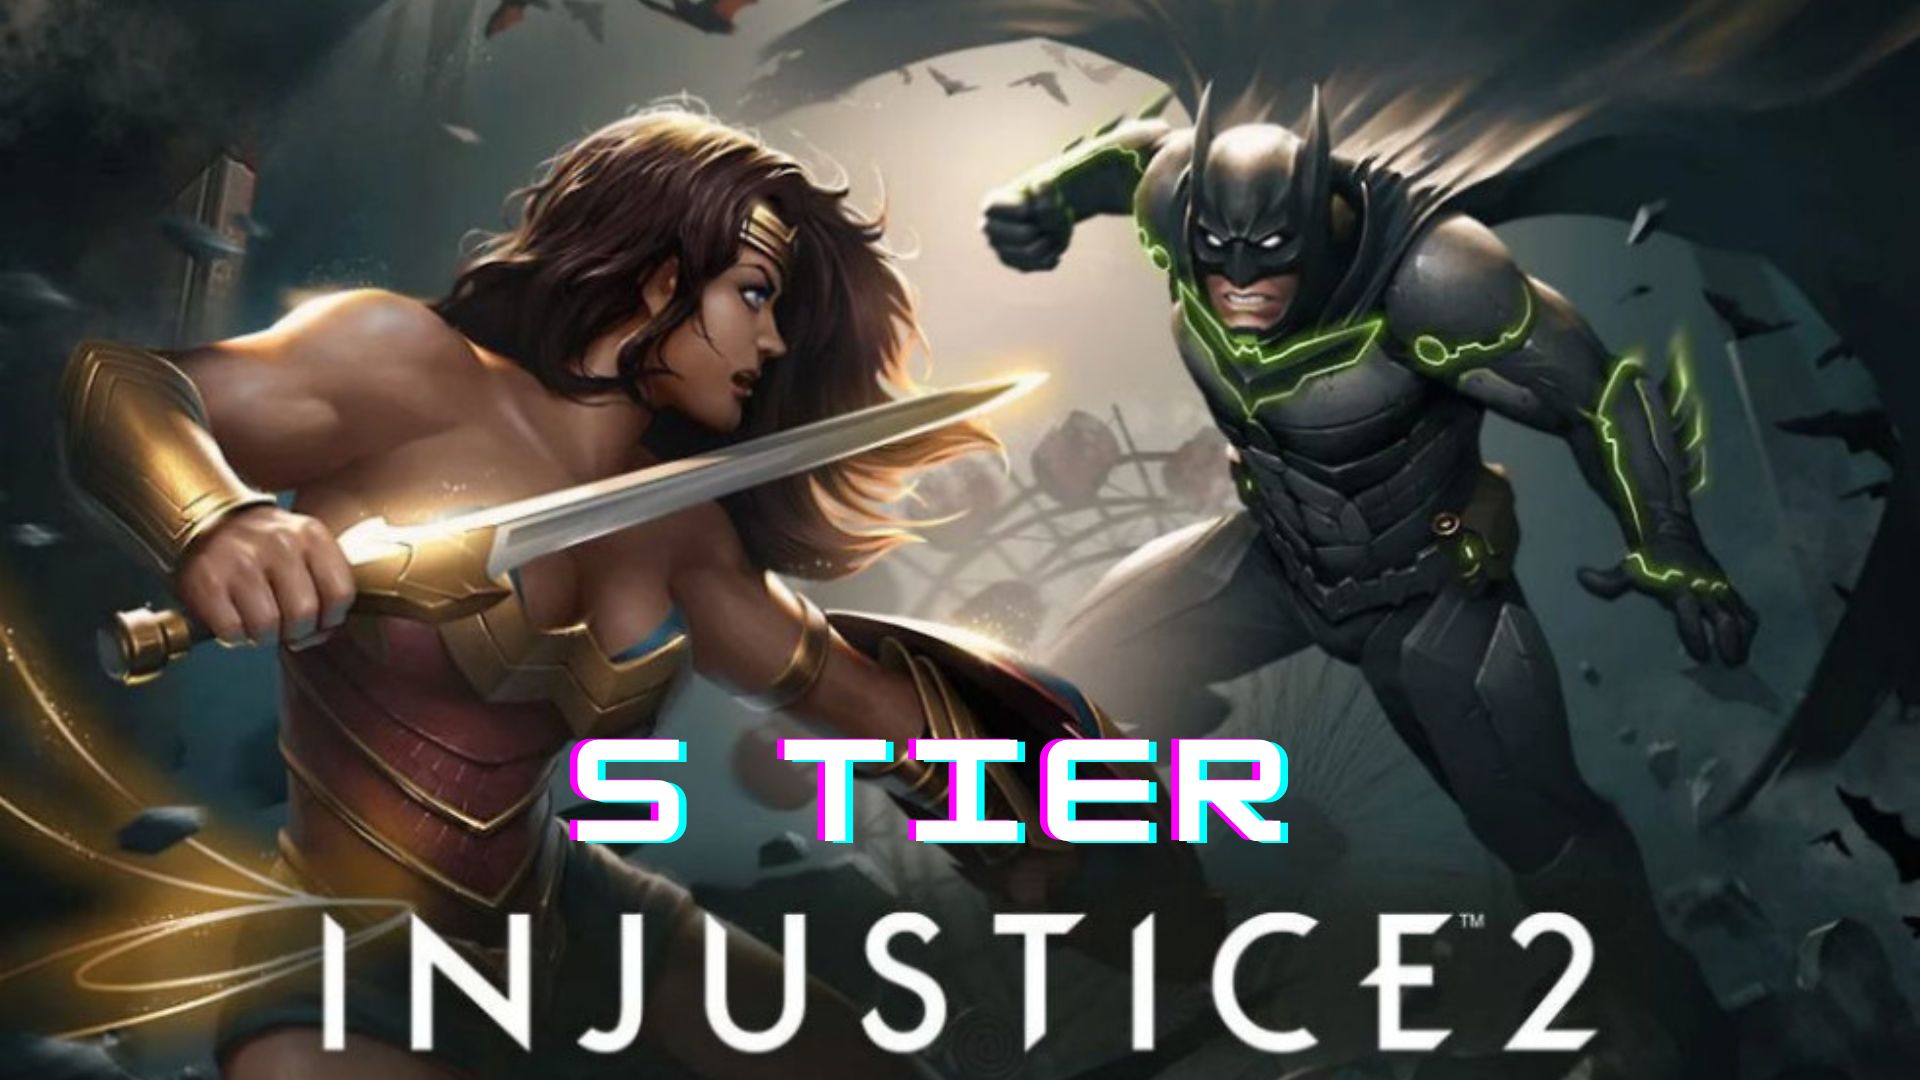 Best characters of Injustice 2